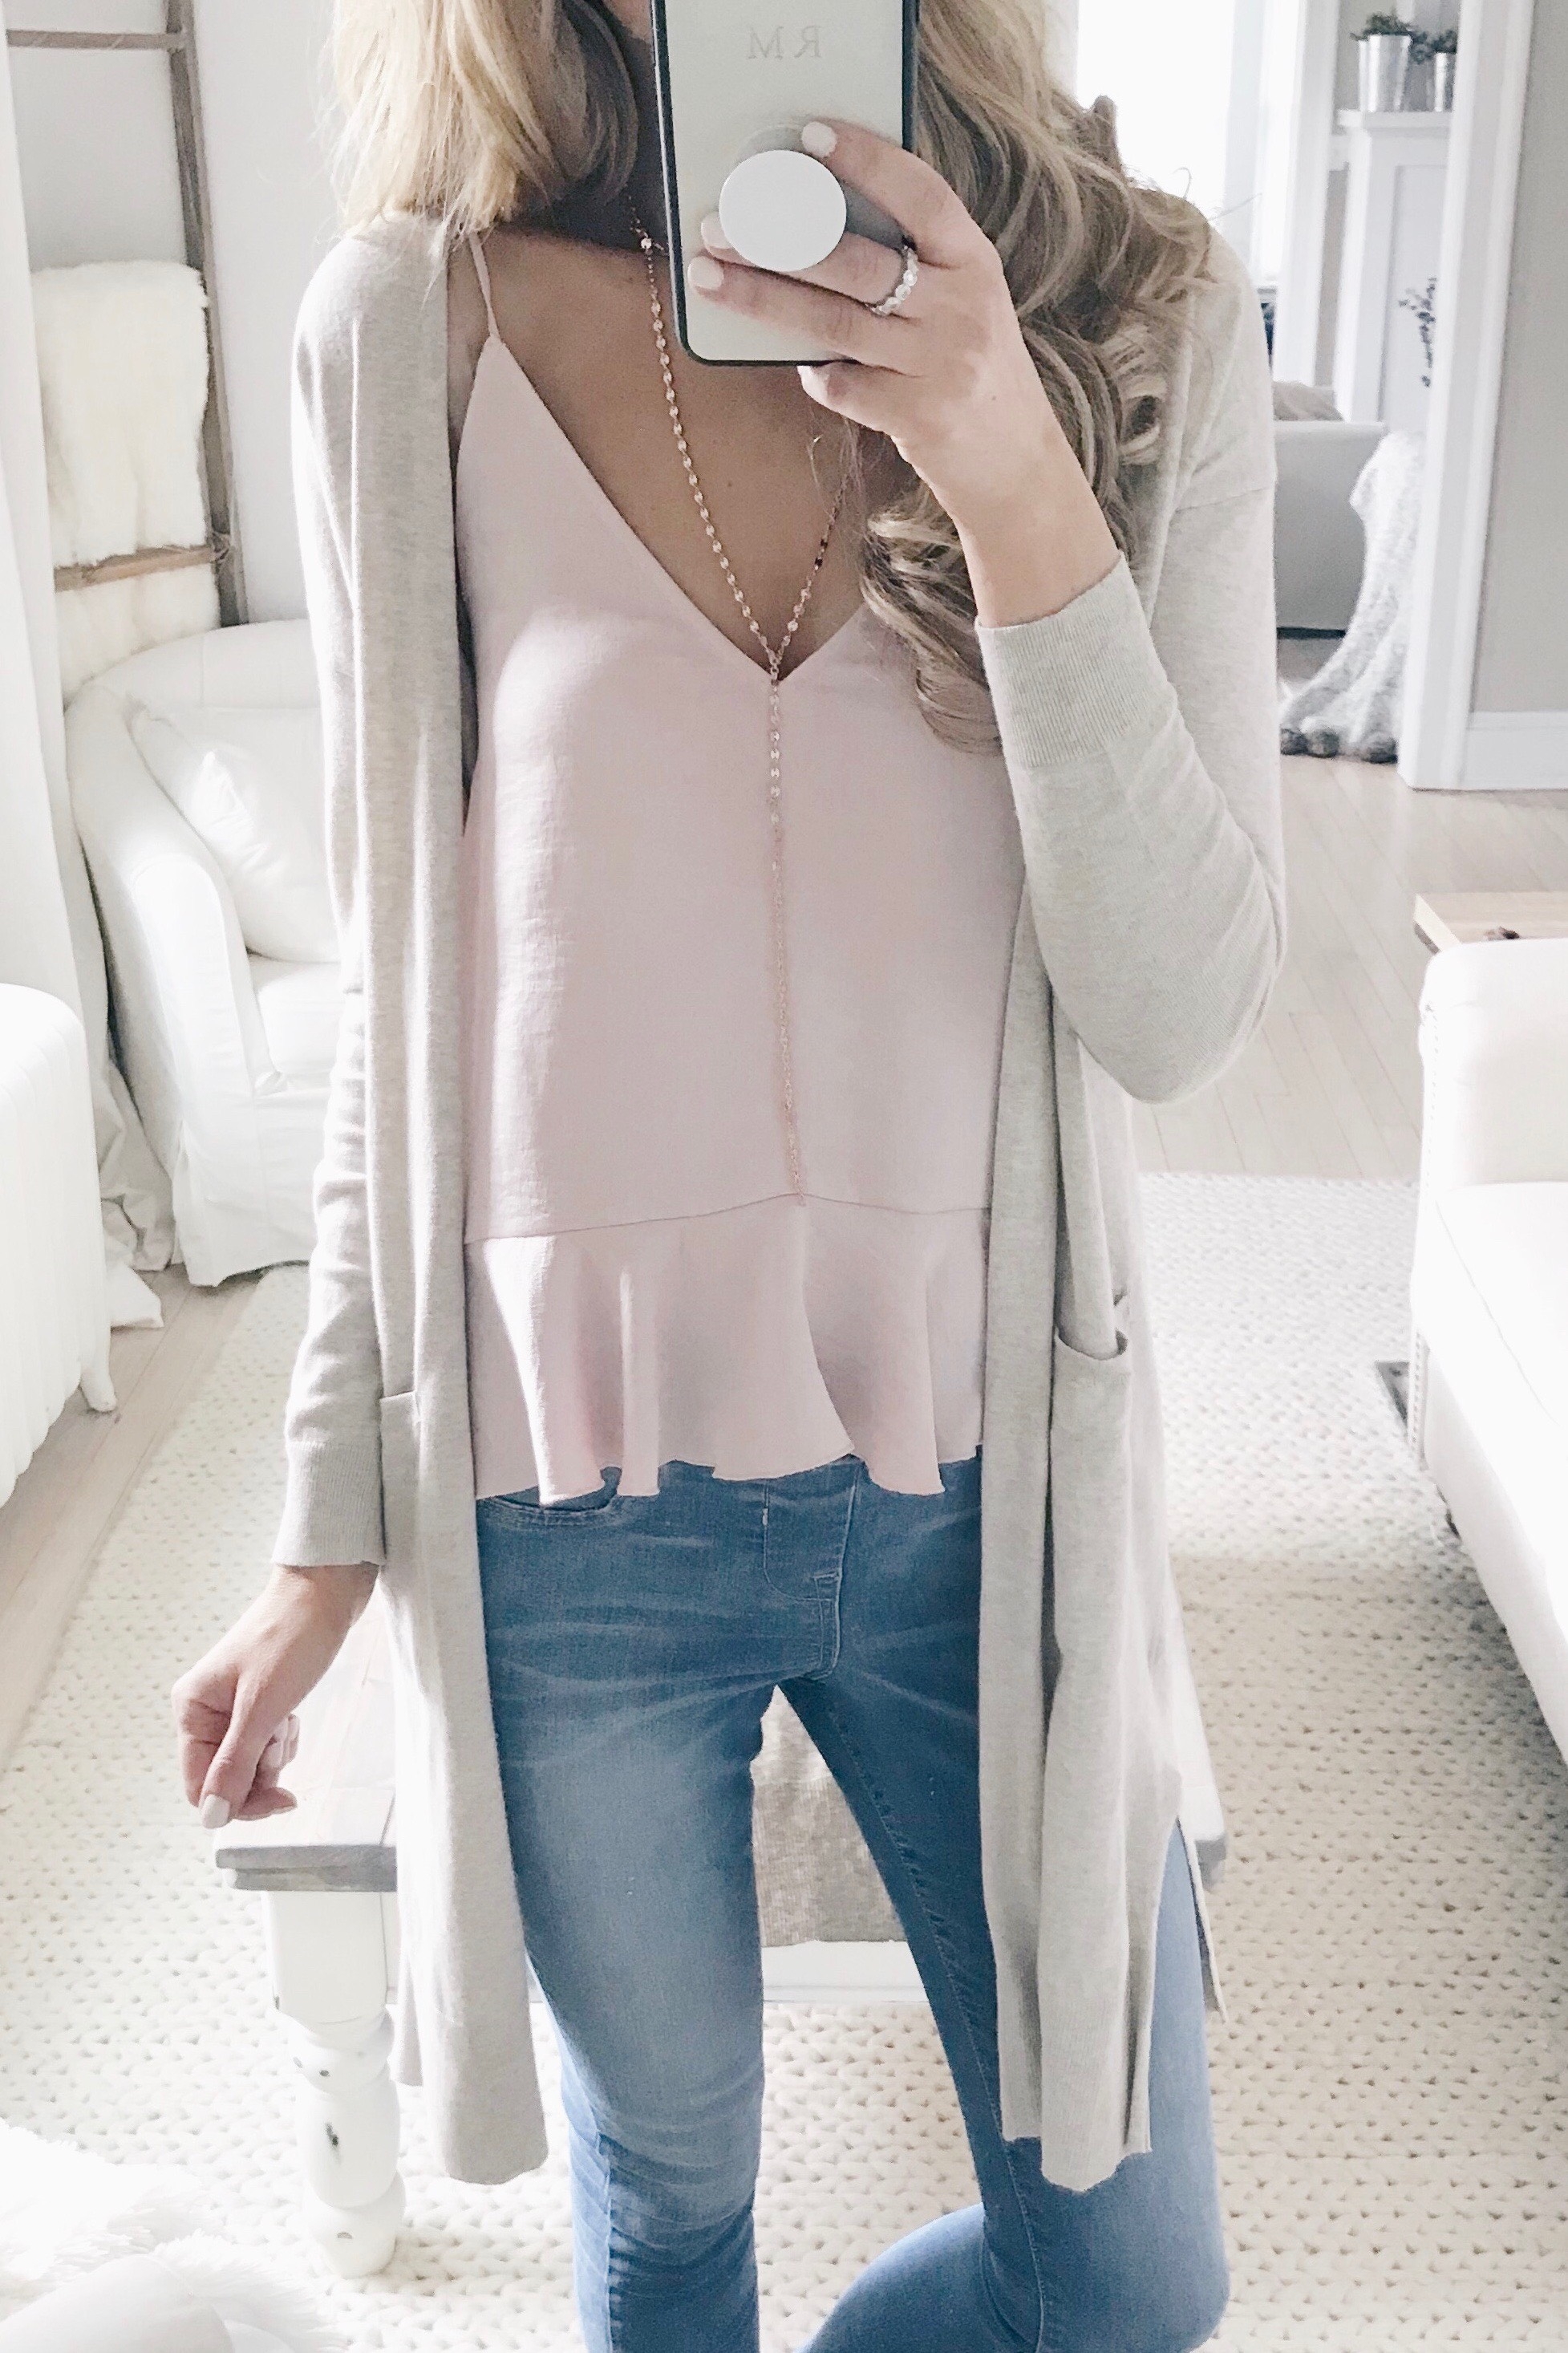 7 Spring cardigans you will want in your closet - long open front sweater cardigan